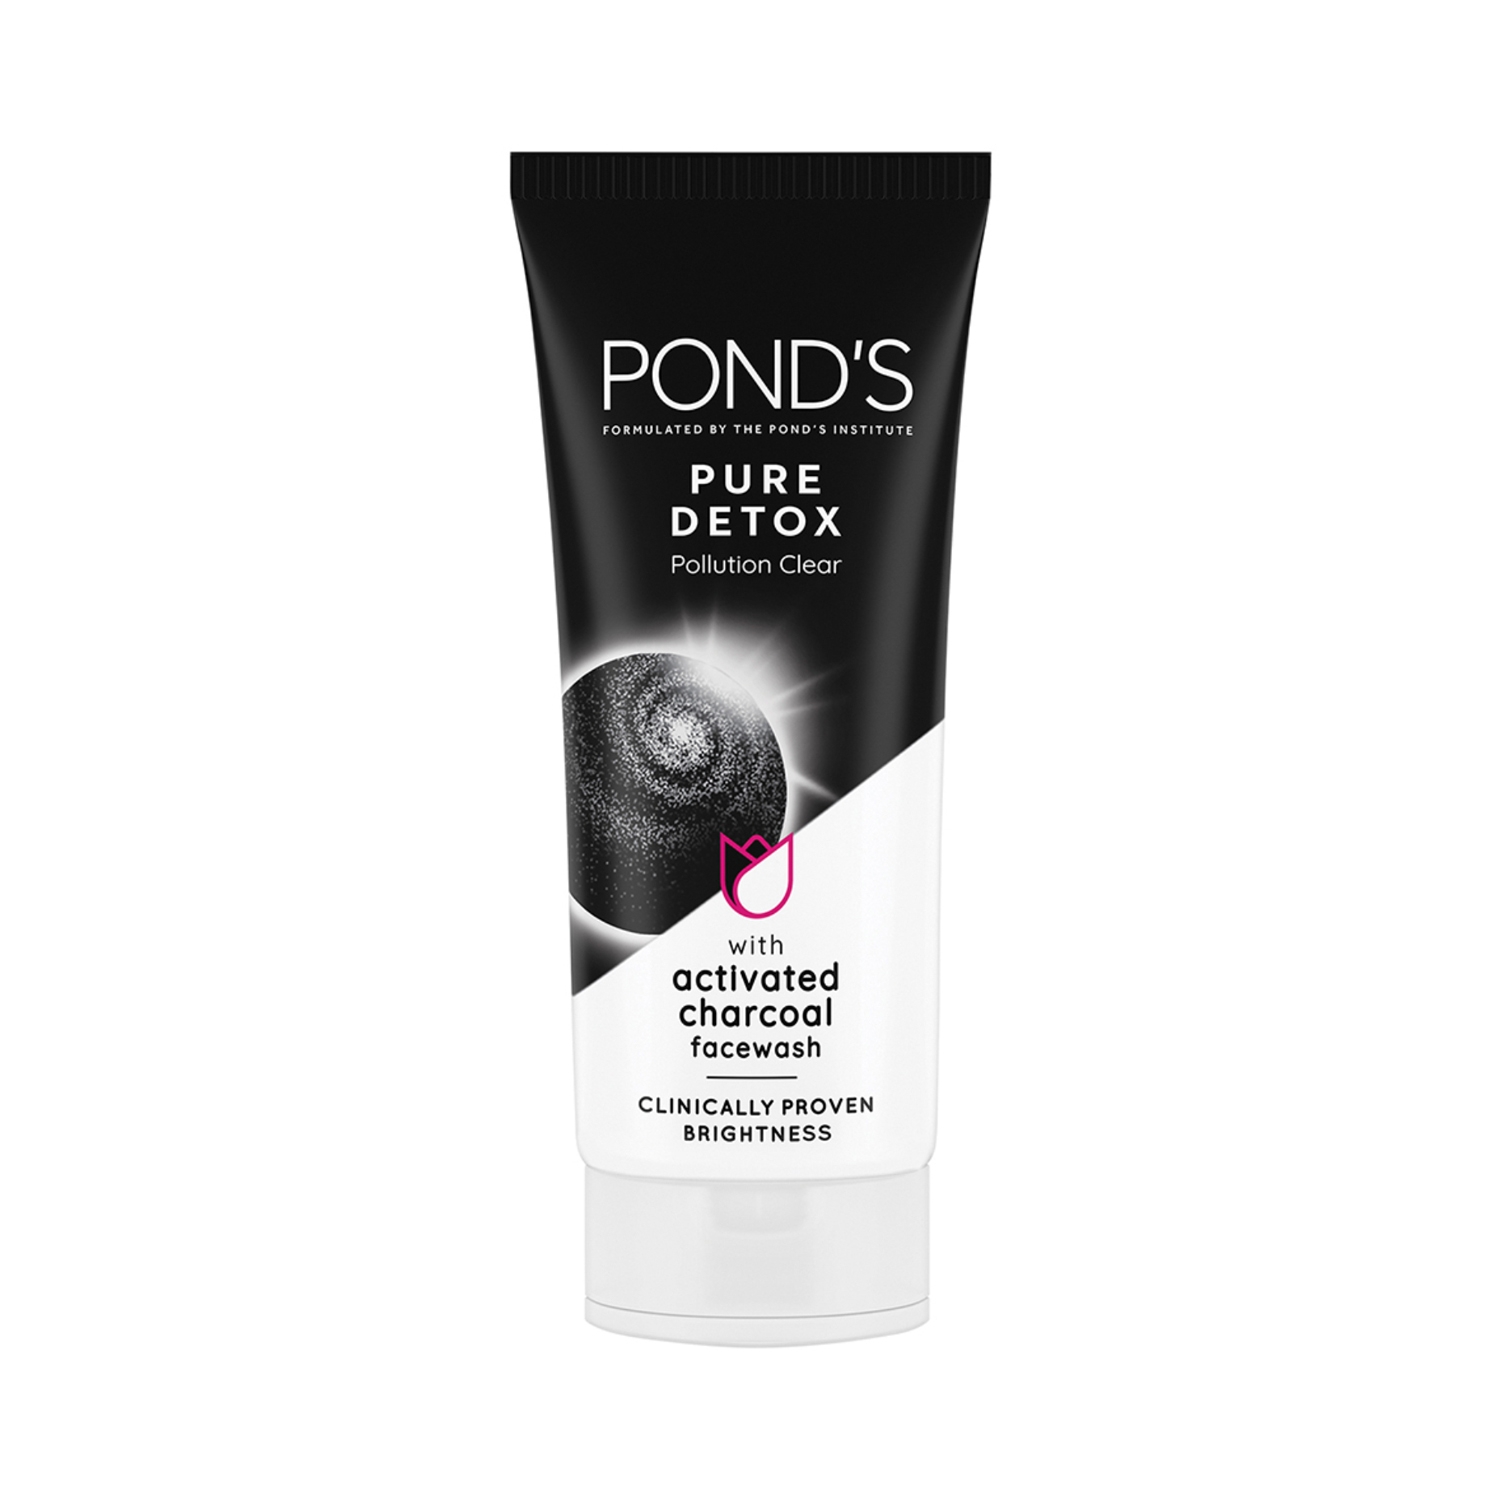 Pond's | Pond's Pure Detox Anti-Pollution Purity Facewash With Activated Charcoal (100g)